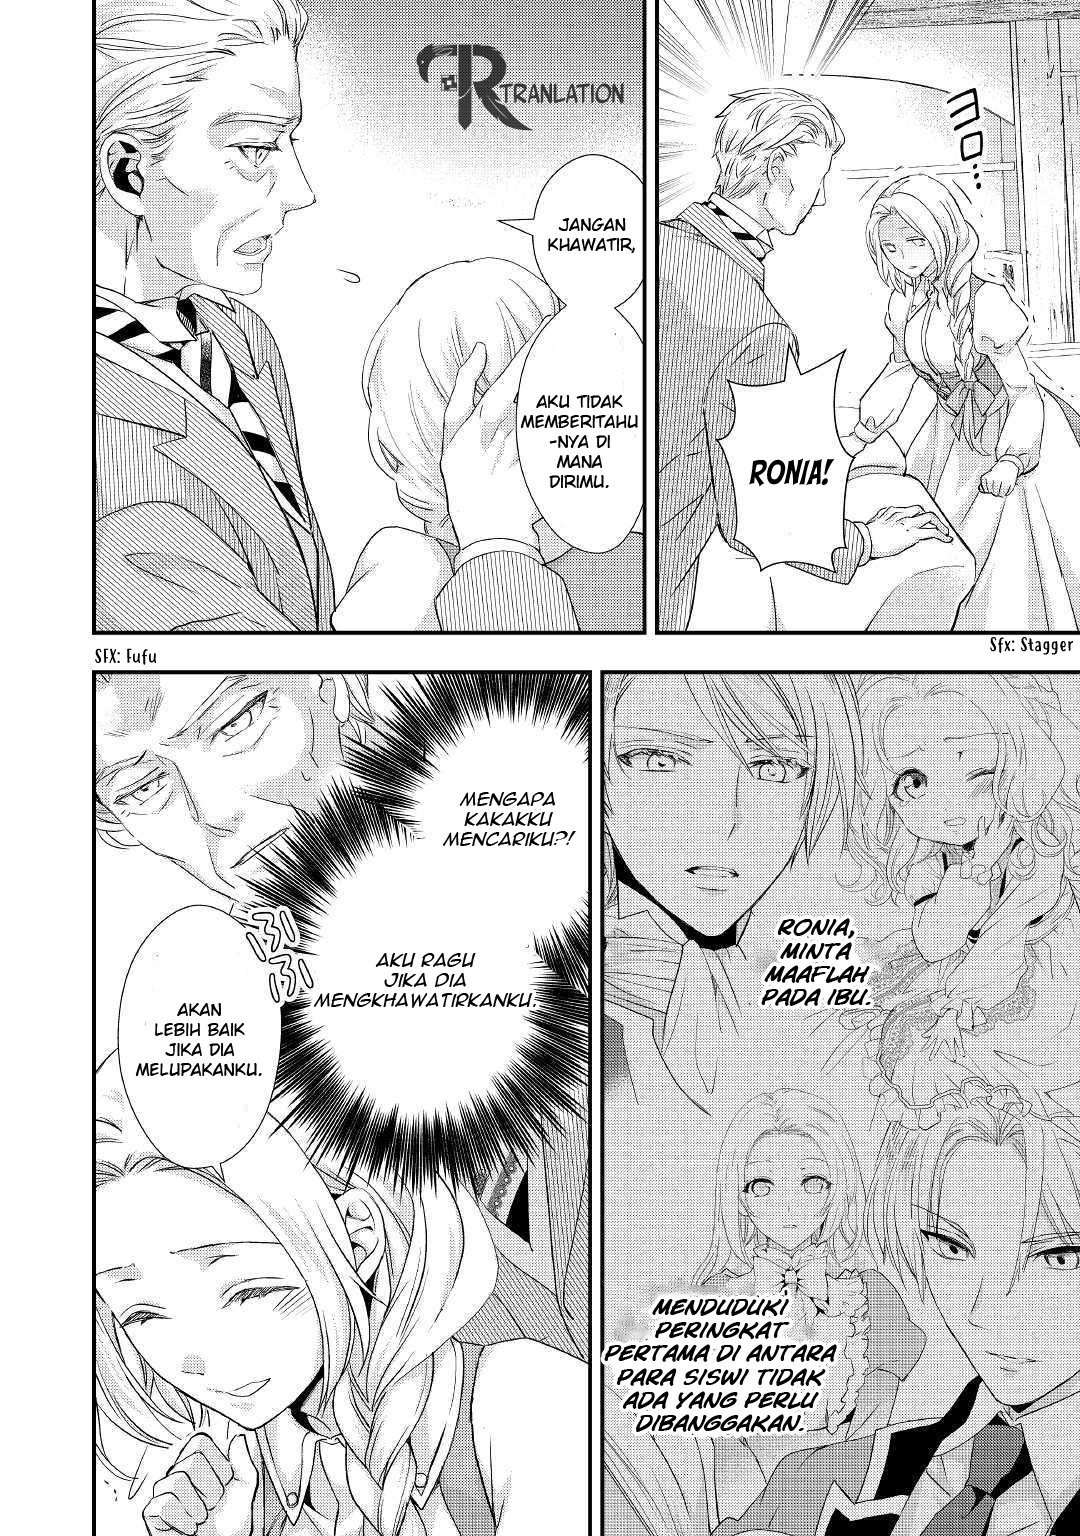 Milady Just Wants to Relax Chapter 09.2